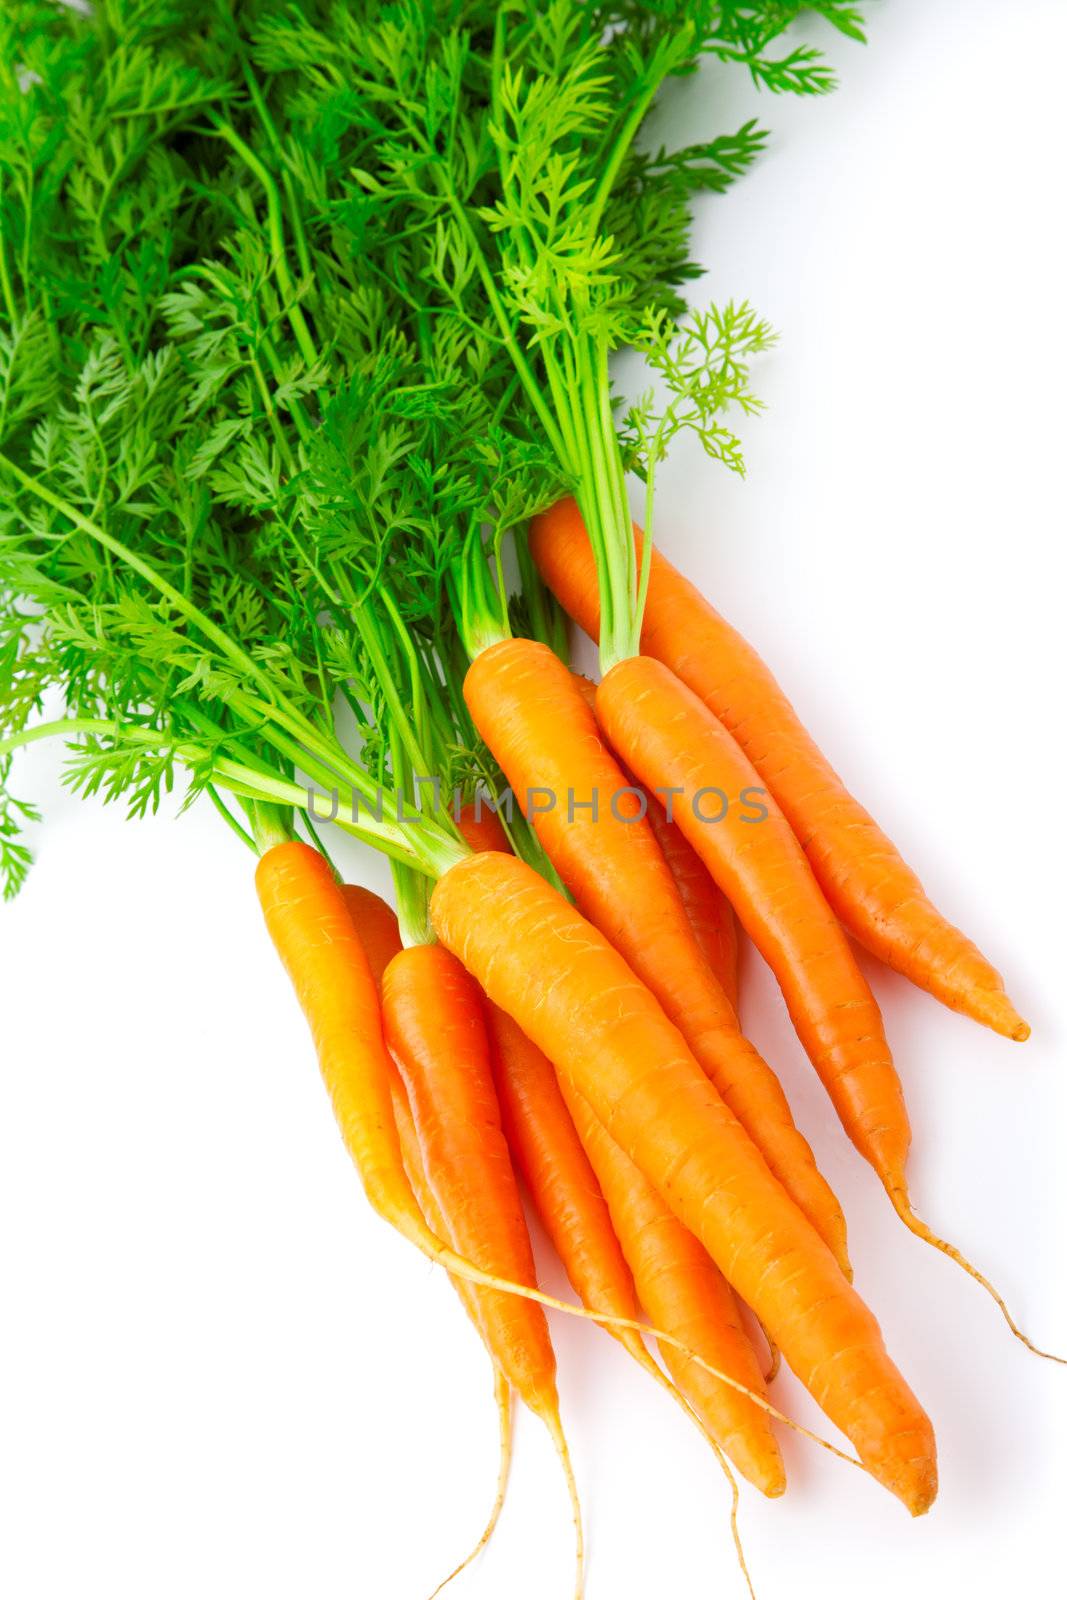 fresh carrot fruits with green leaves, isolated on white backgro by motorolka